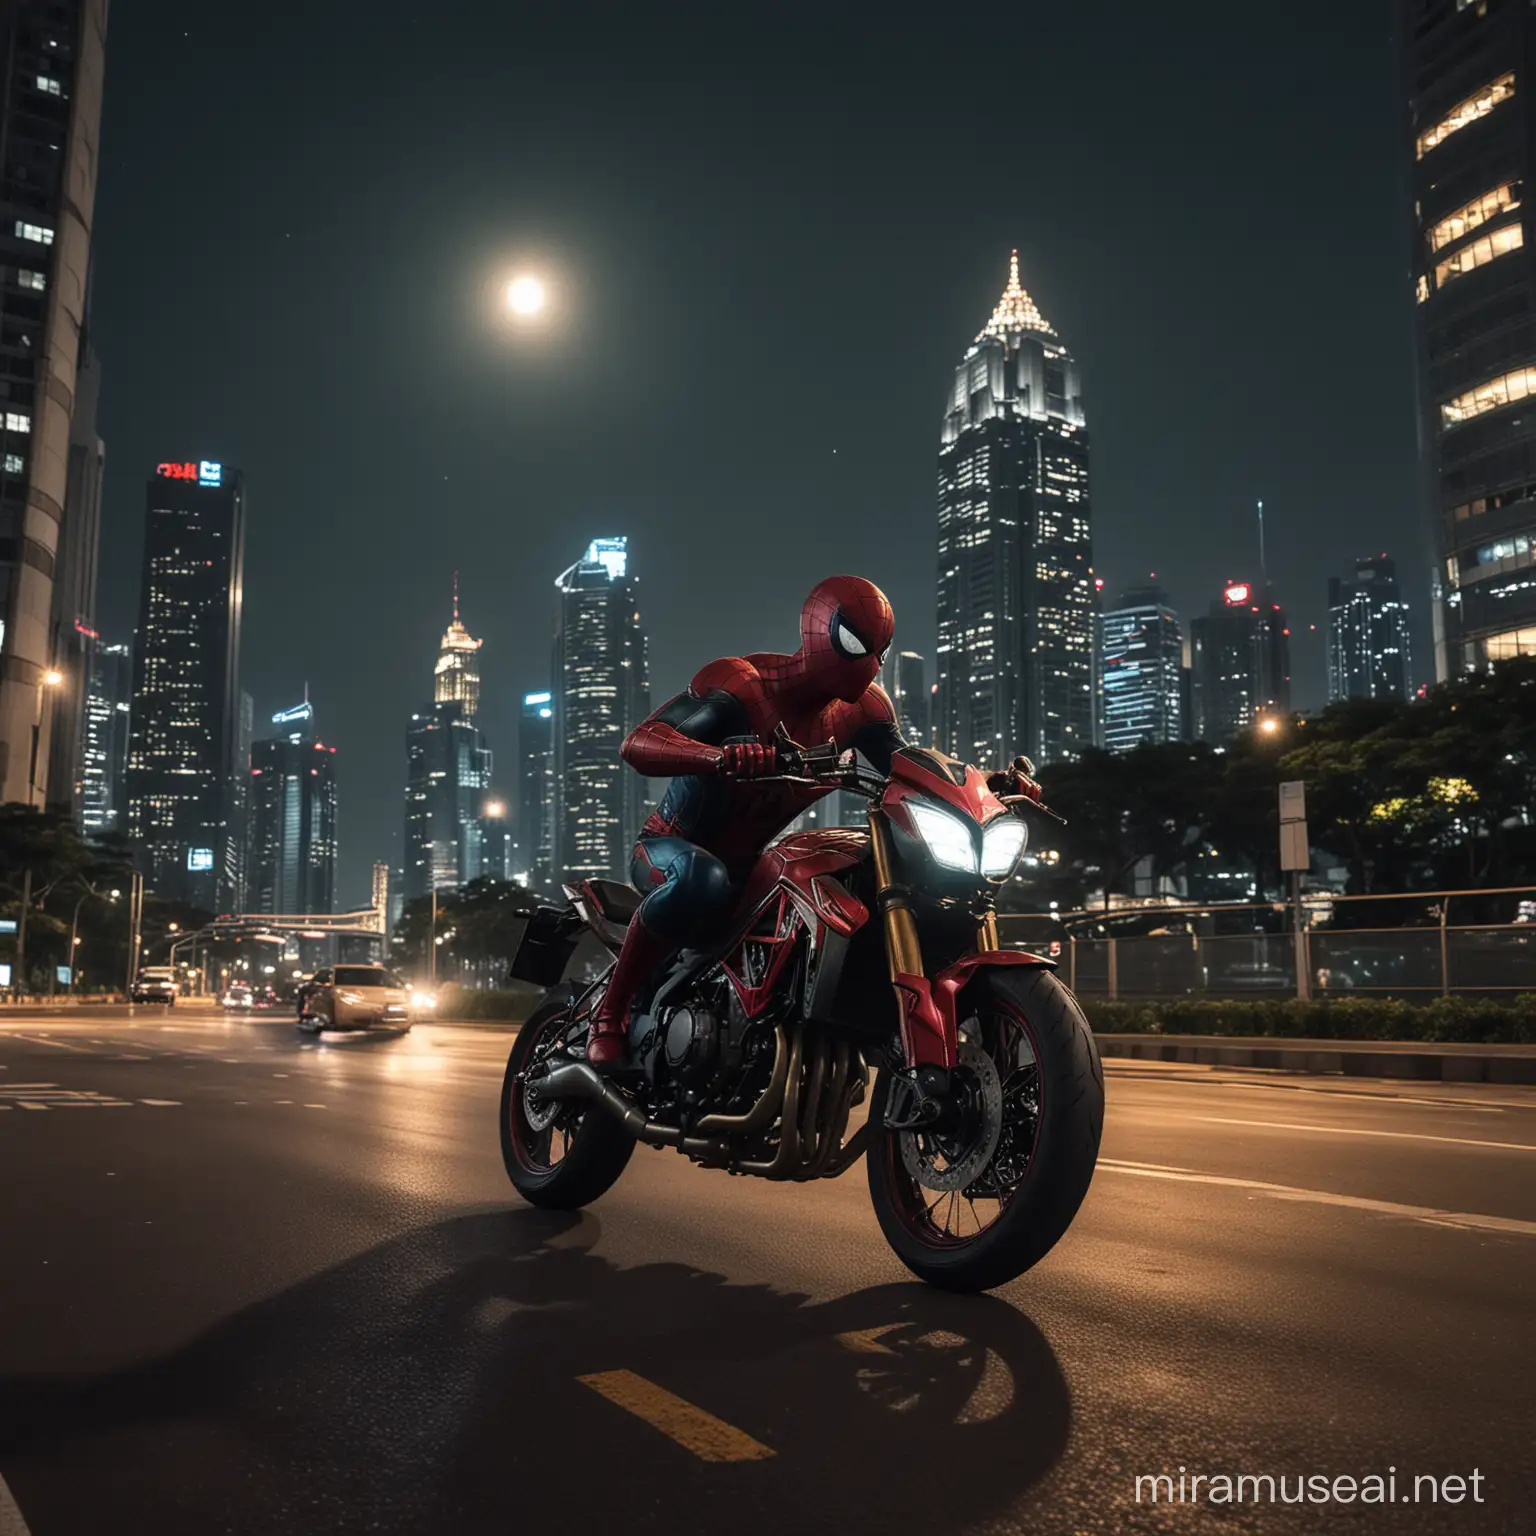 give me realistic image of spiderman from marvel cinematic universe. in this picture he's riding a motorbike in jakarta road in the night. he ride a bike with tall building around them and there is a crescent moont behind. there is a busway transjakarta on the road and also mrt. he is enjoy the view of jakarta. the image is from the side with the camera slightly upwards.